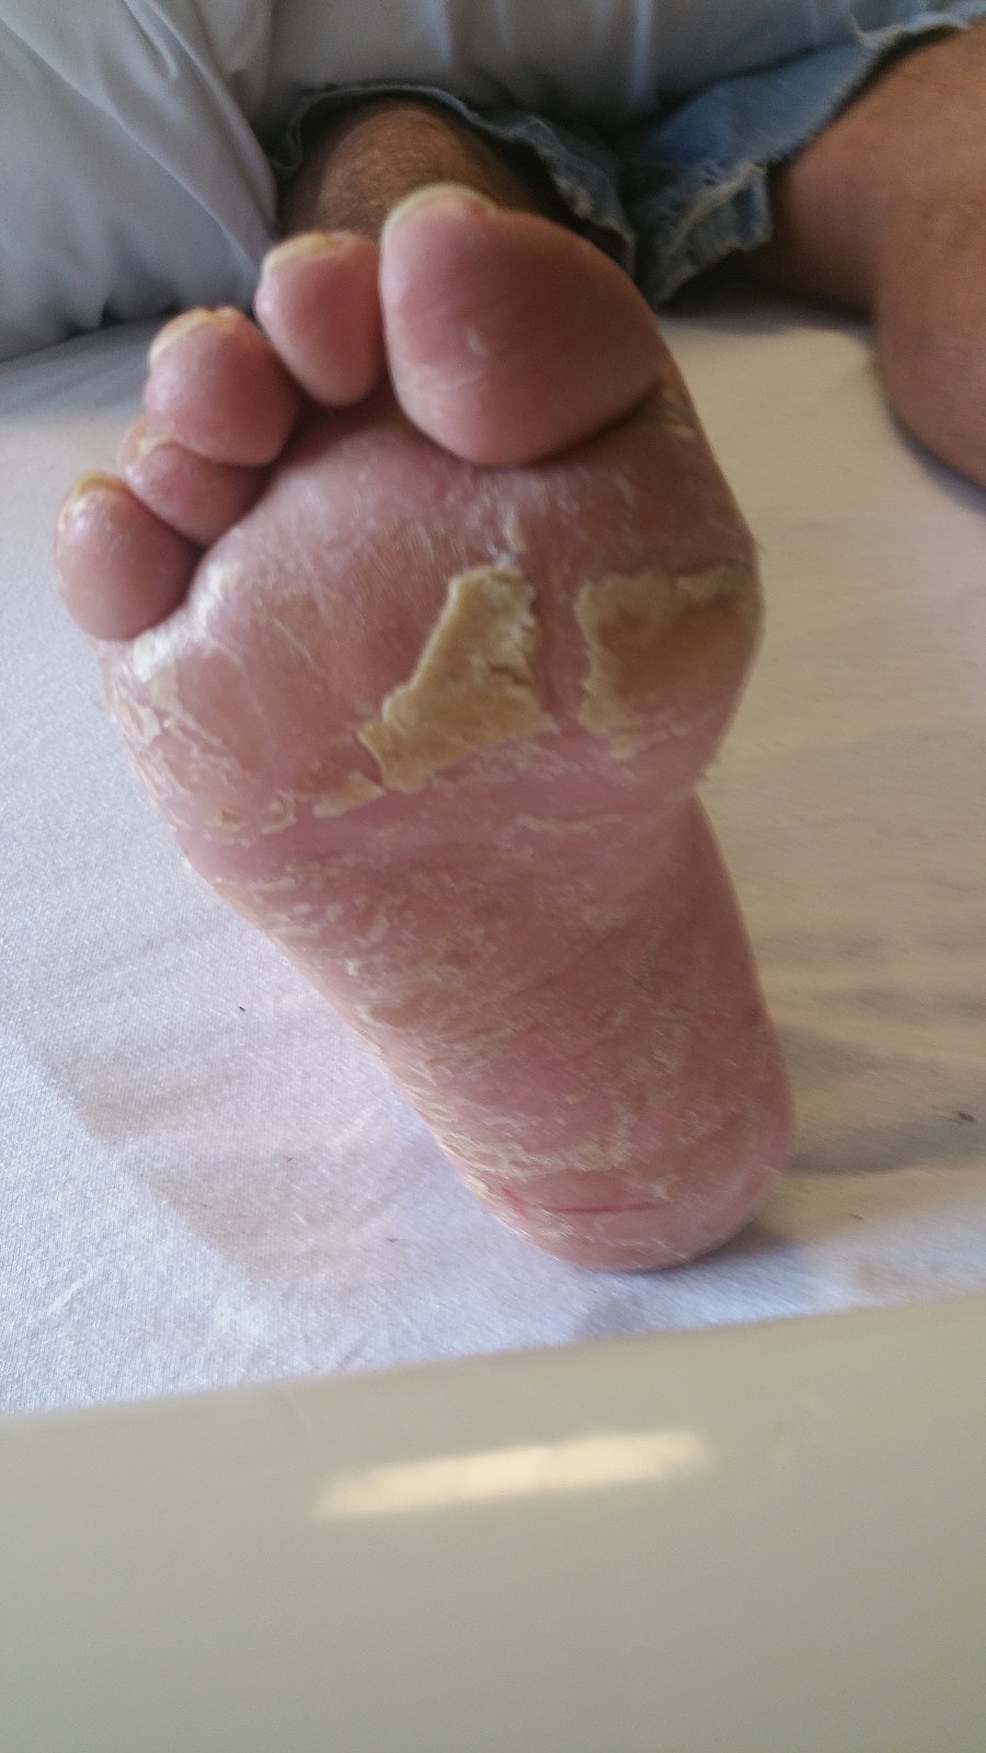 Exfoliation-and-inflammation-of-right-foot.